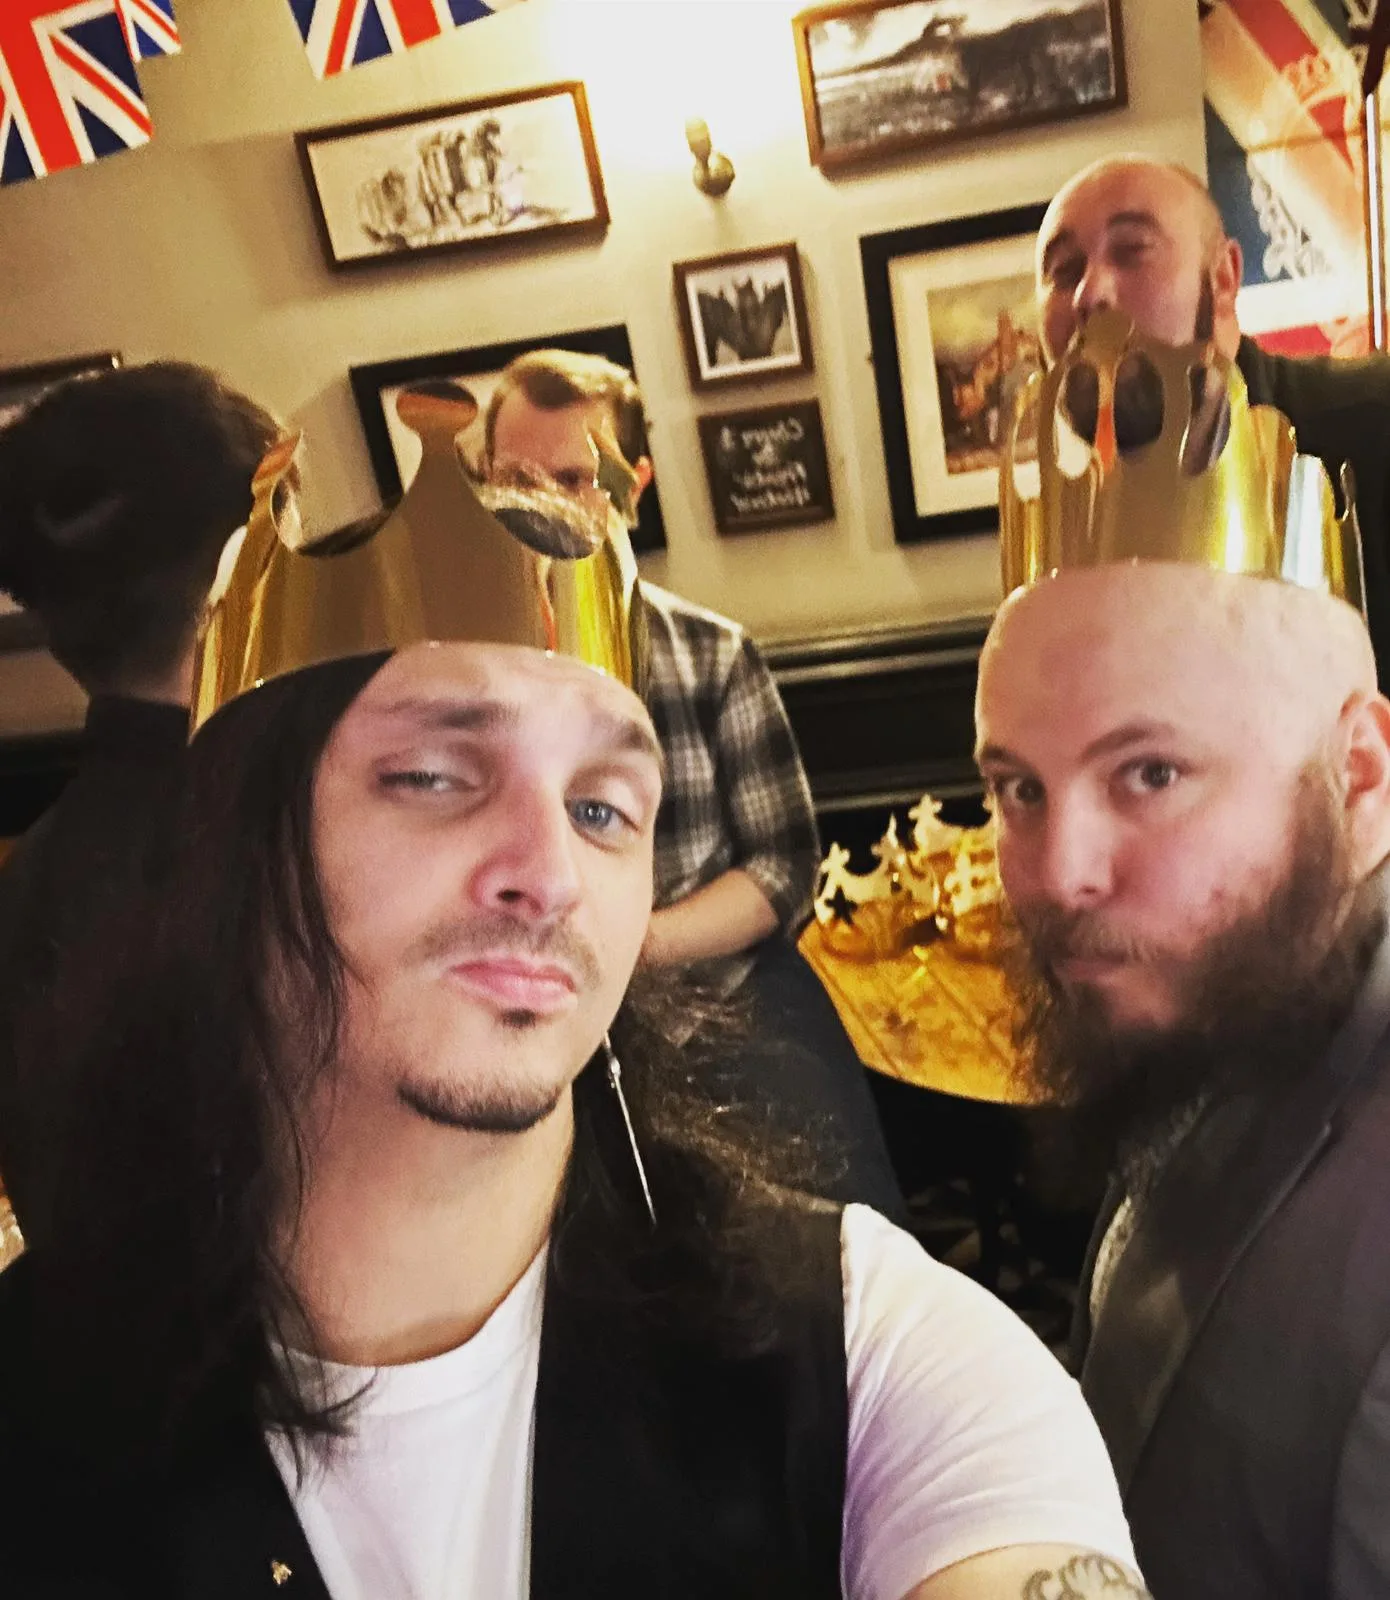 Two new Masons in paper crowns celebrating the coronation, as part of our 2023 Social Calendar